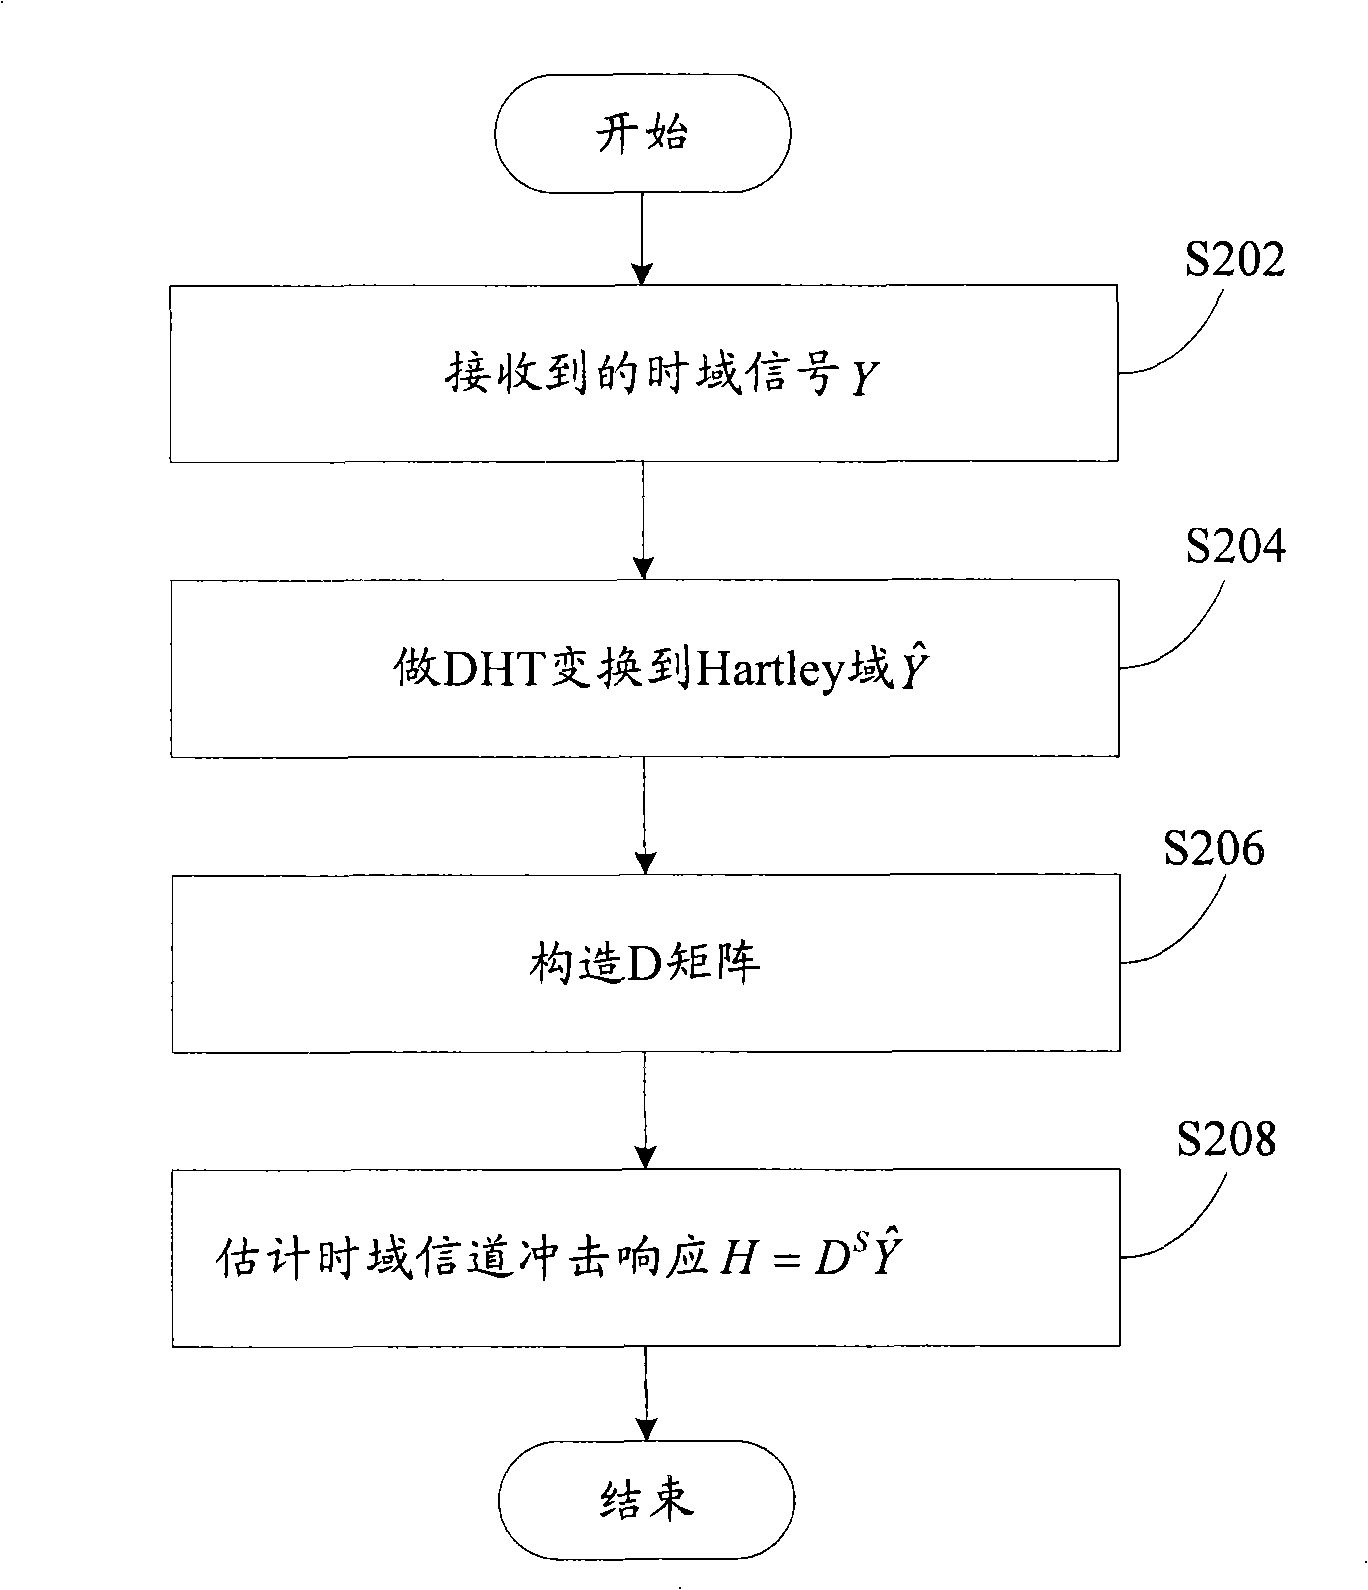 Channel estimation method for MIMO OFDM system